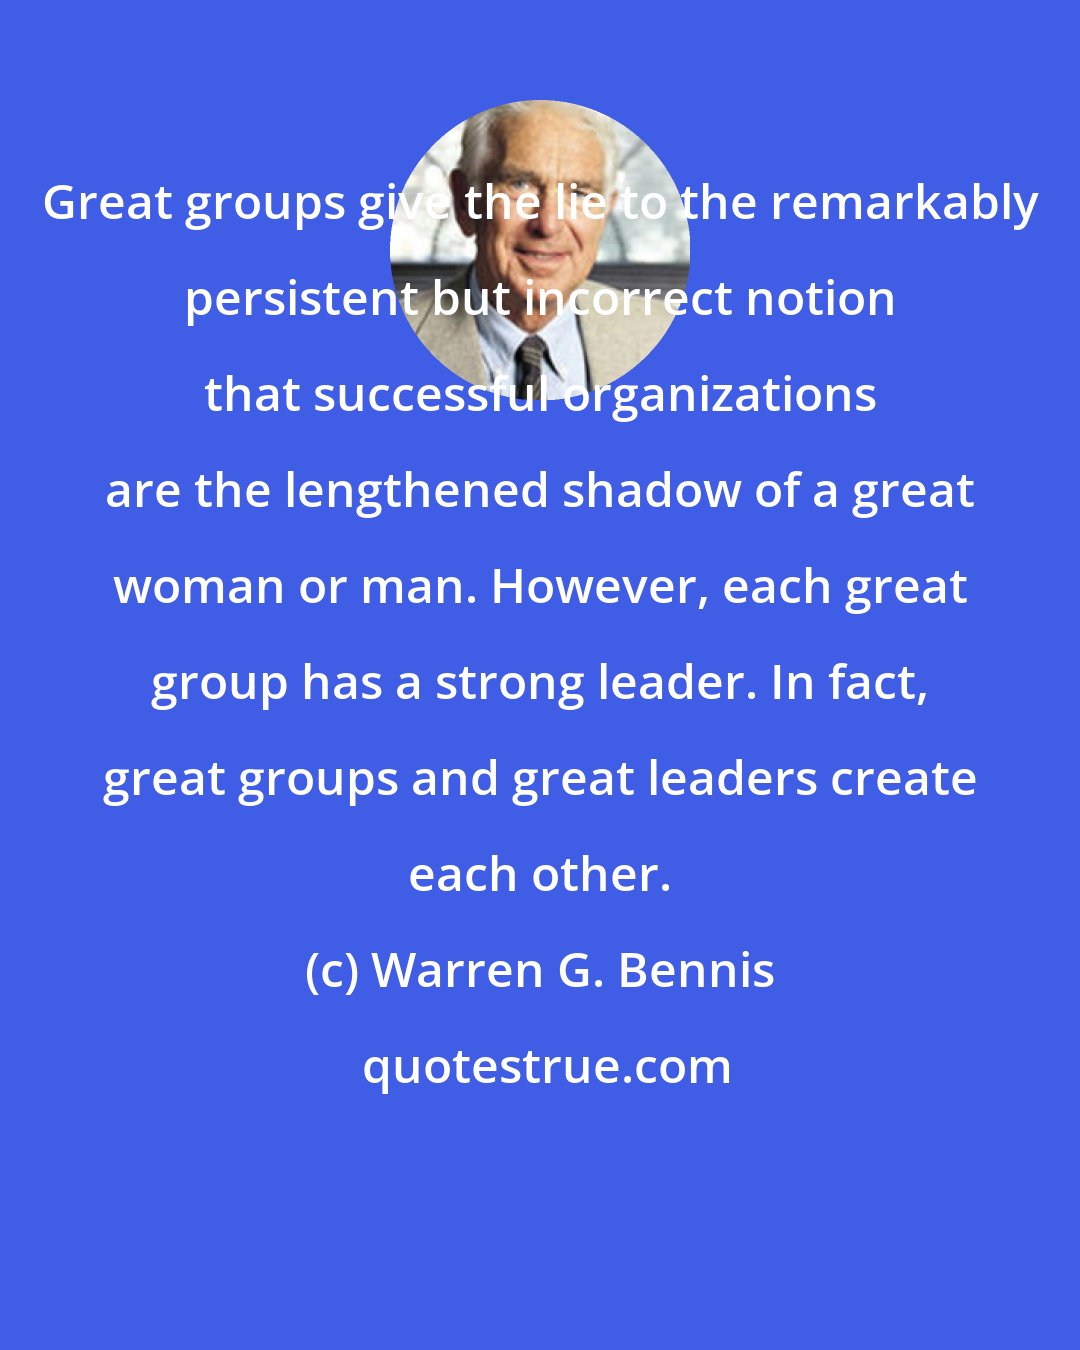 Warren G. Bennis: Great groups give the lie to the remarkably persistent but incorrect notion that successful organizations are the lengthened shadow of a great woman or man. However, each great group has a strong leader. In fact, great groups and great leaders create each other.